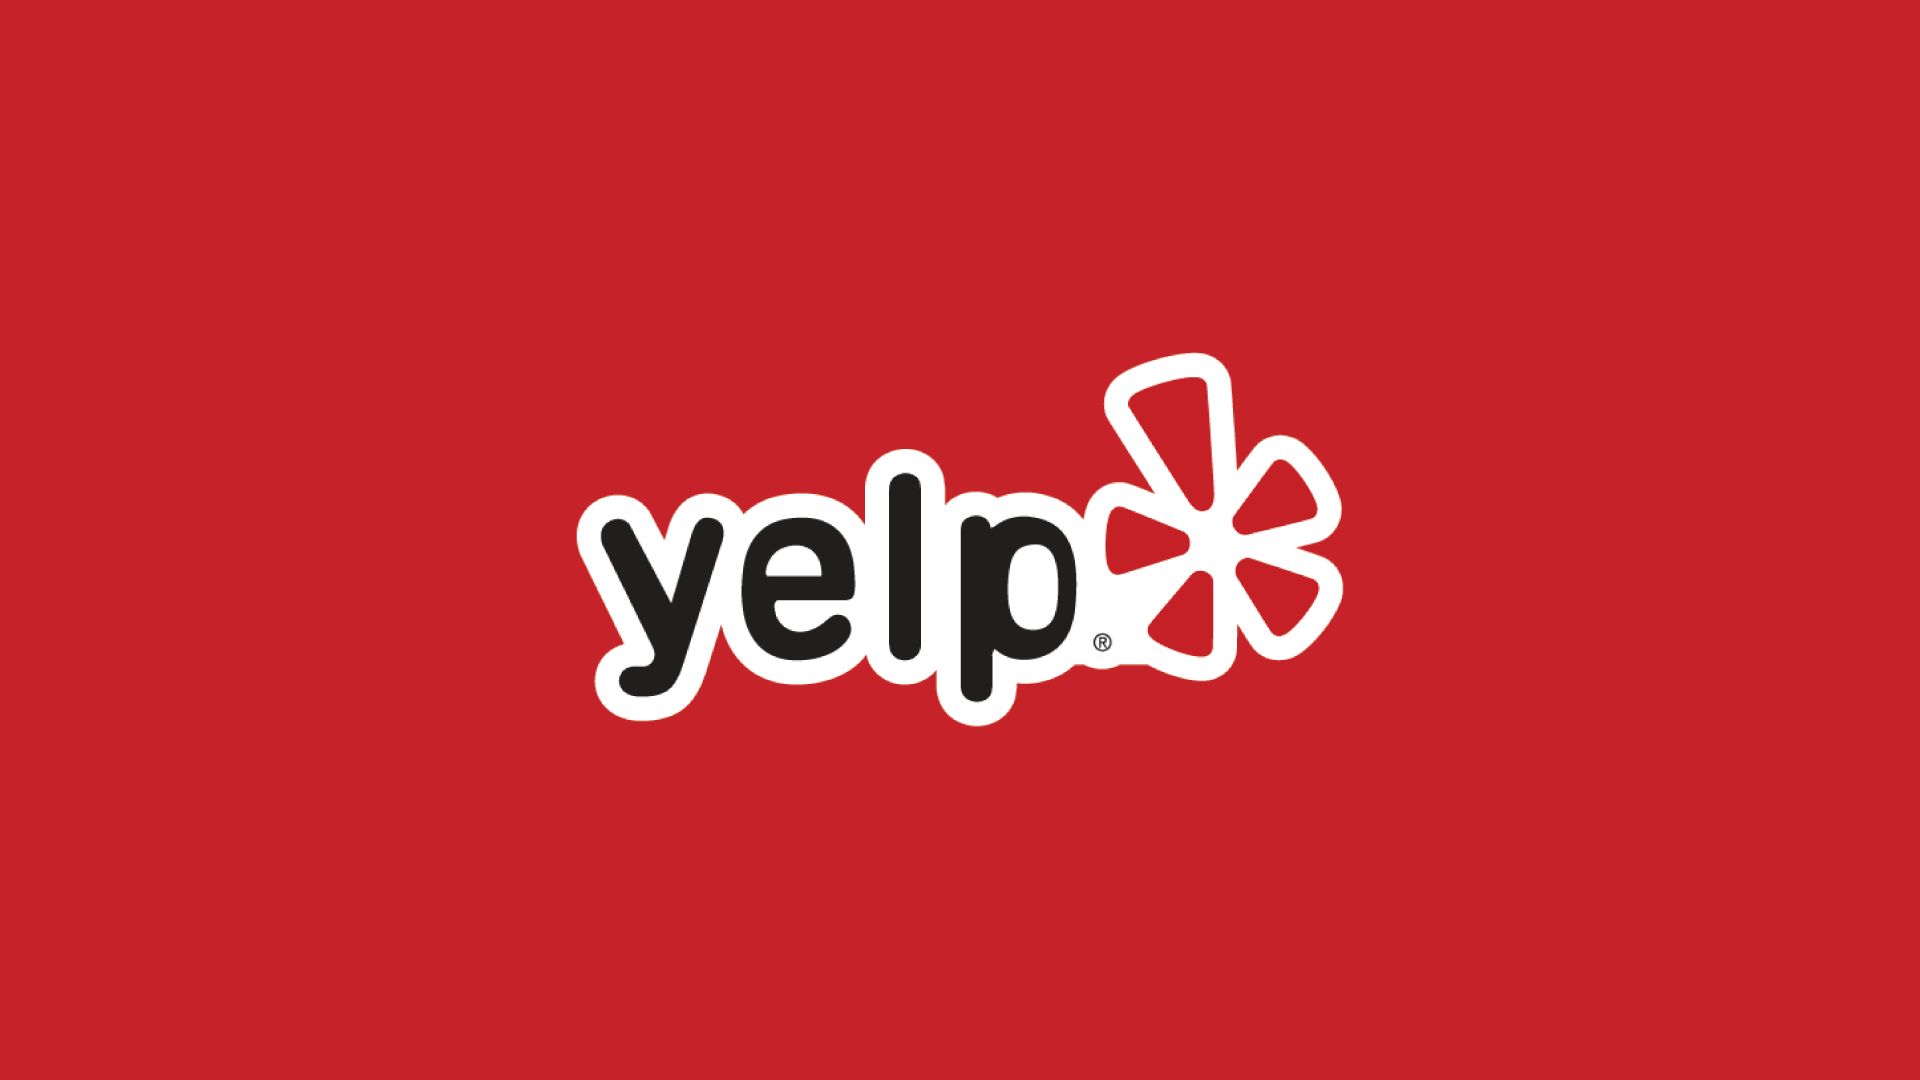 Yelp Advertising for Service Contractor Business